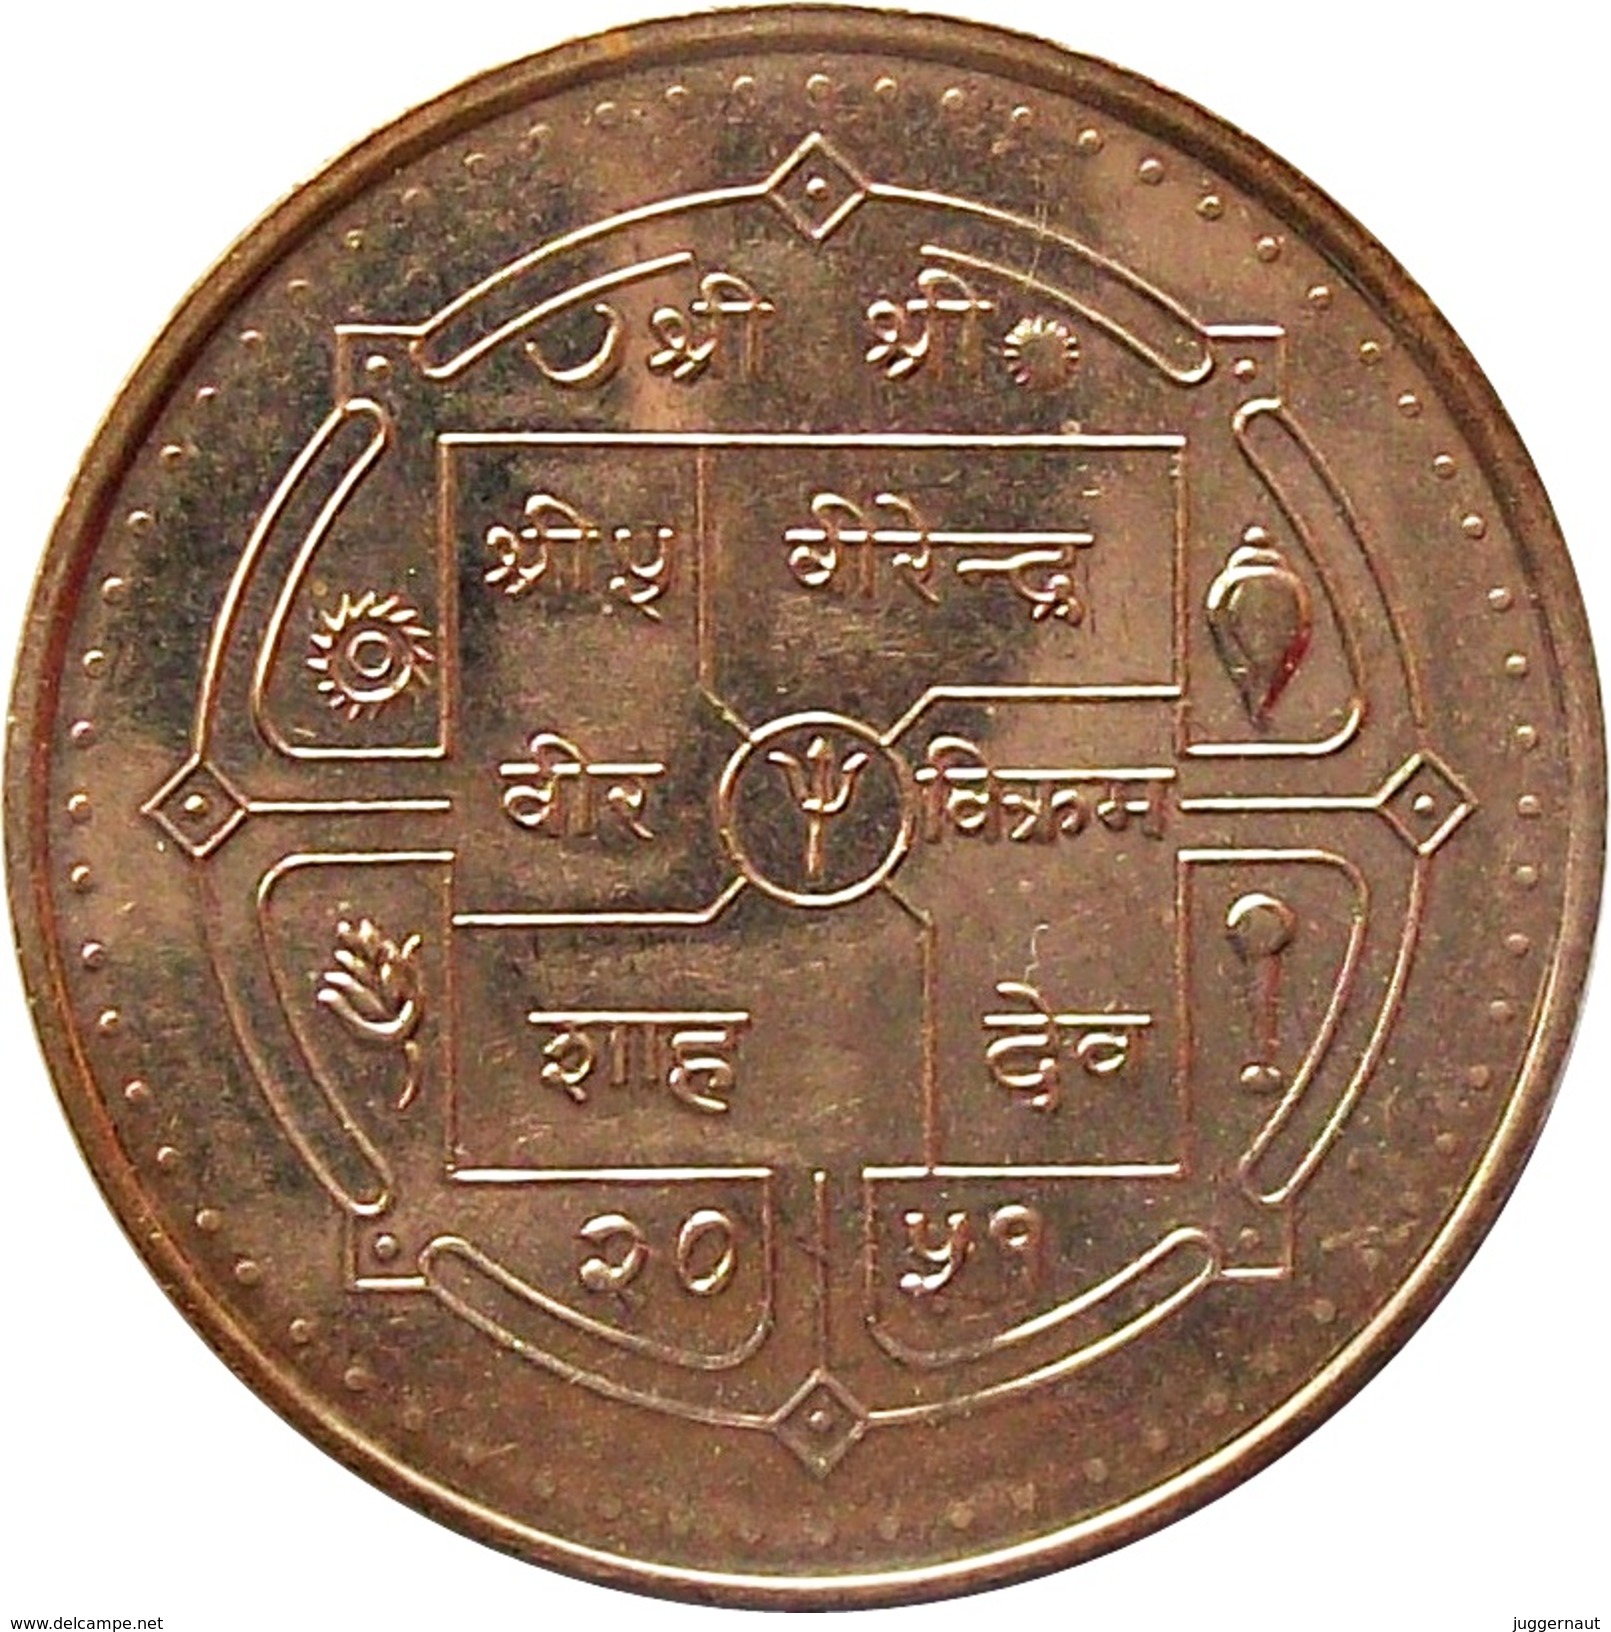 NEW CONSTITUTION OF NEPAL RUPEE 10 COMMEMORATIVE COIN 1994 KM-1076 UNCIRCULATED UNC - Népal